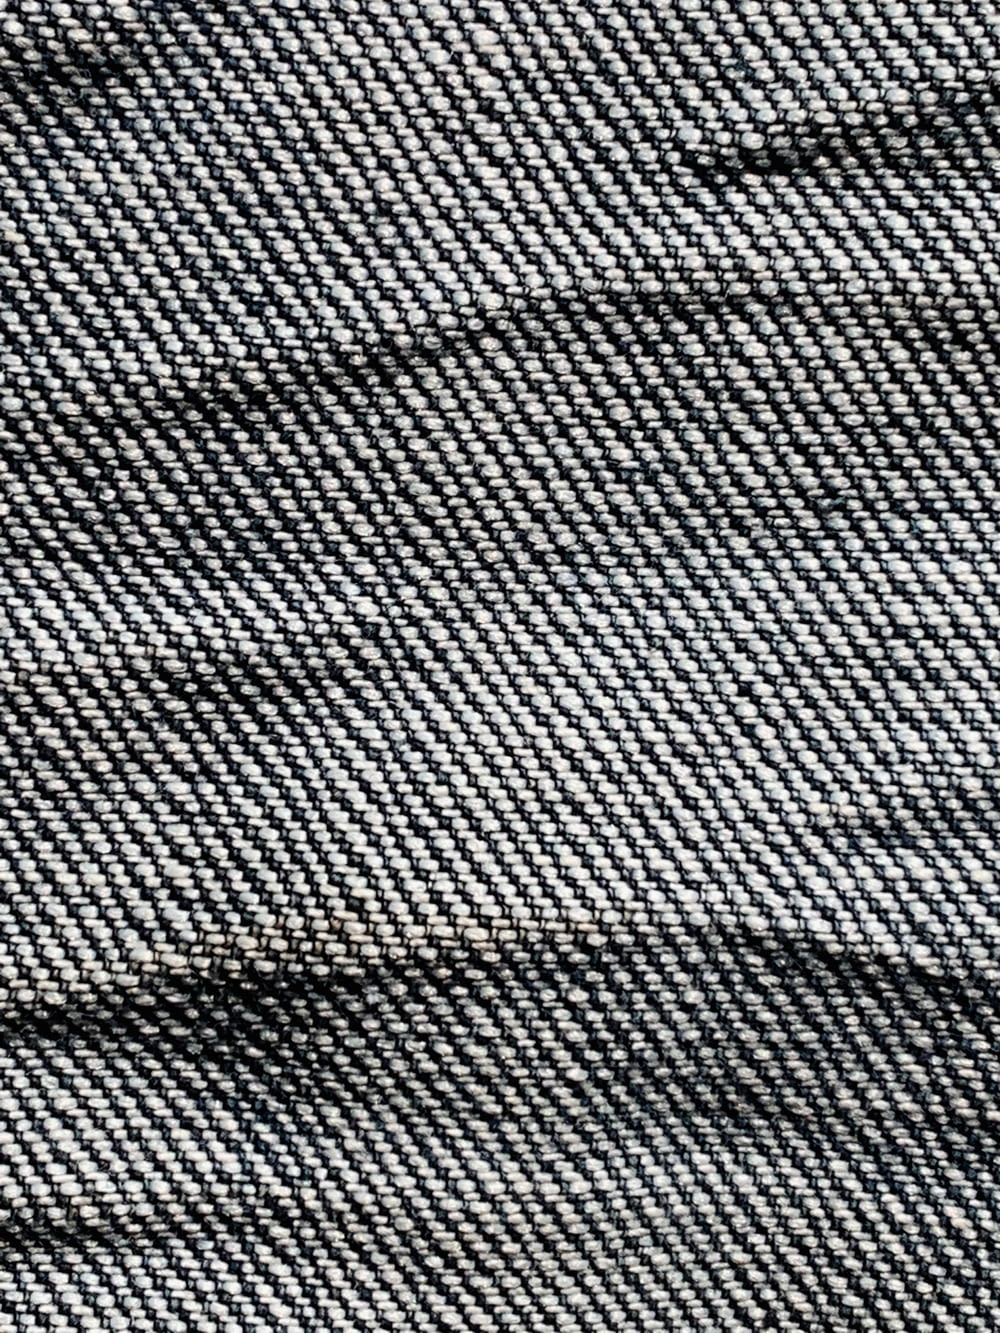 a close up of a blue and white checkered fabric